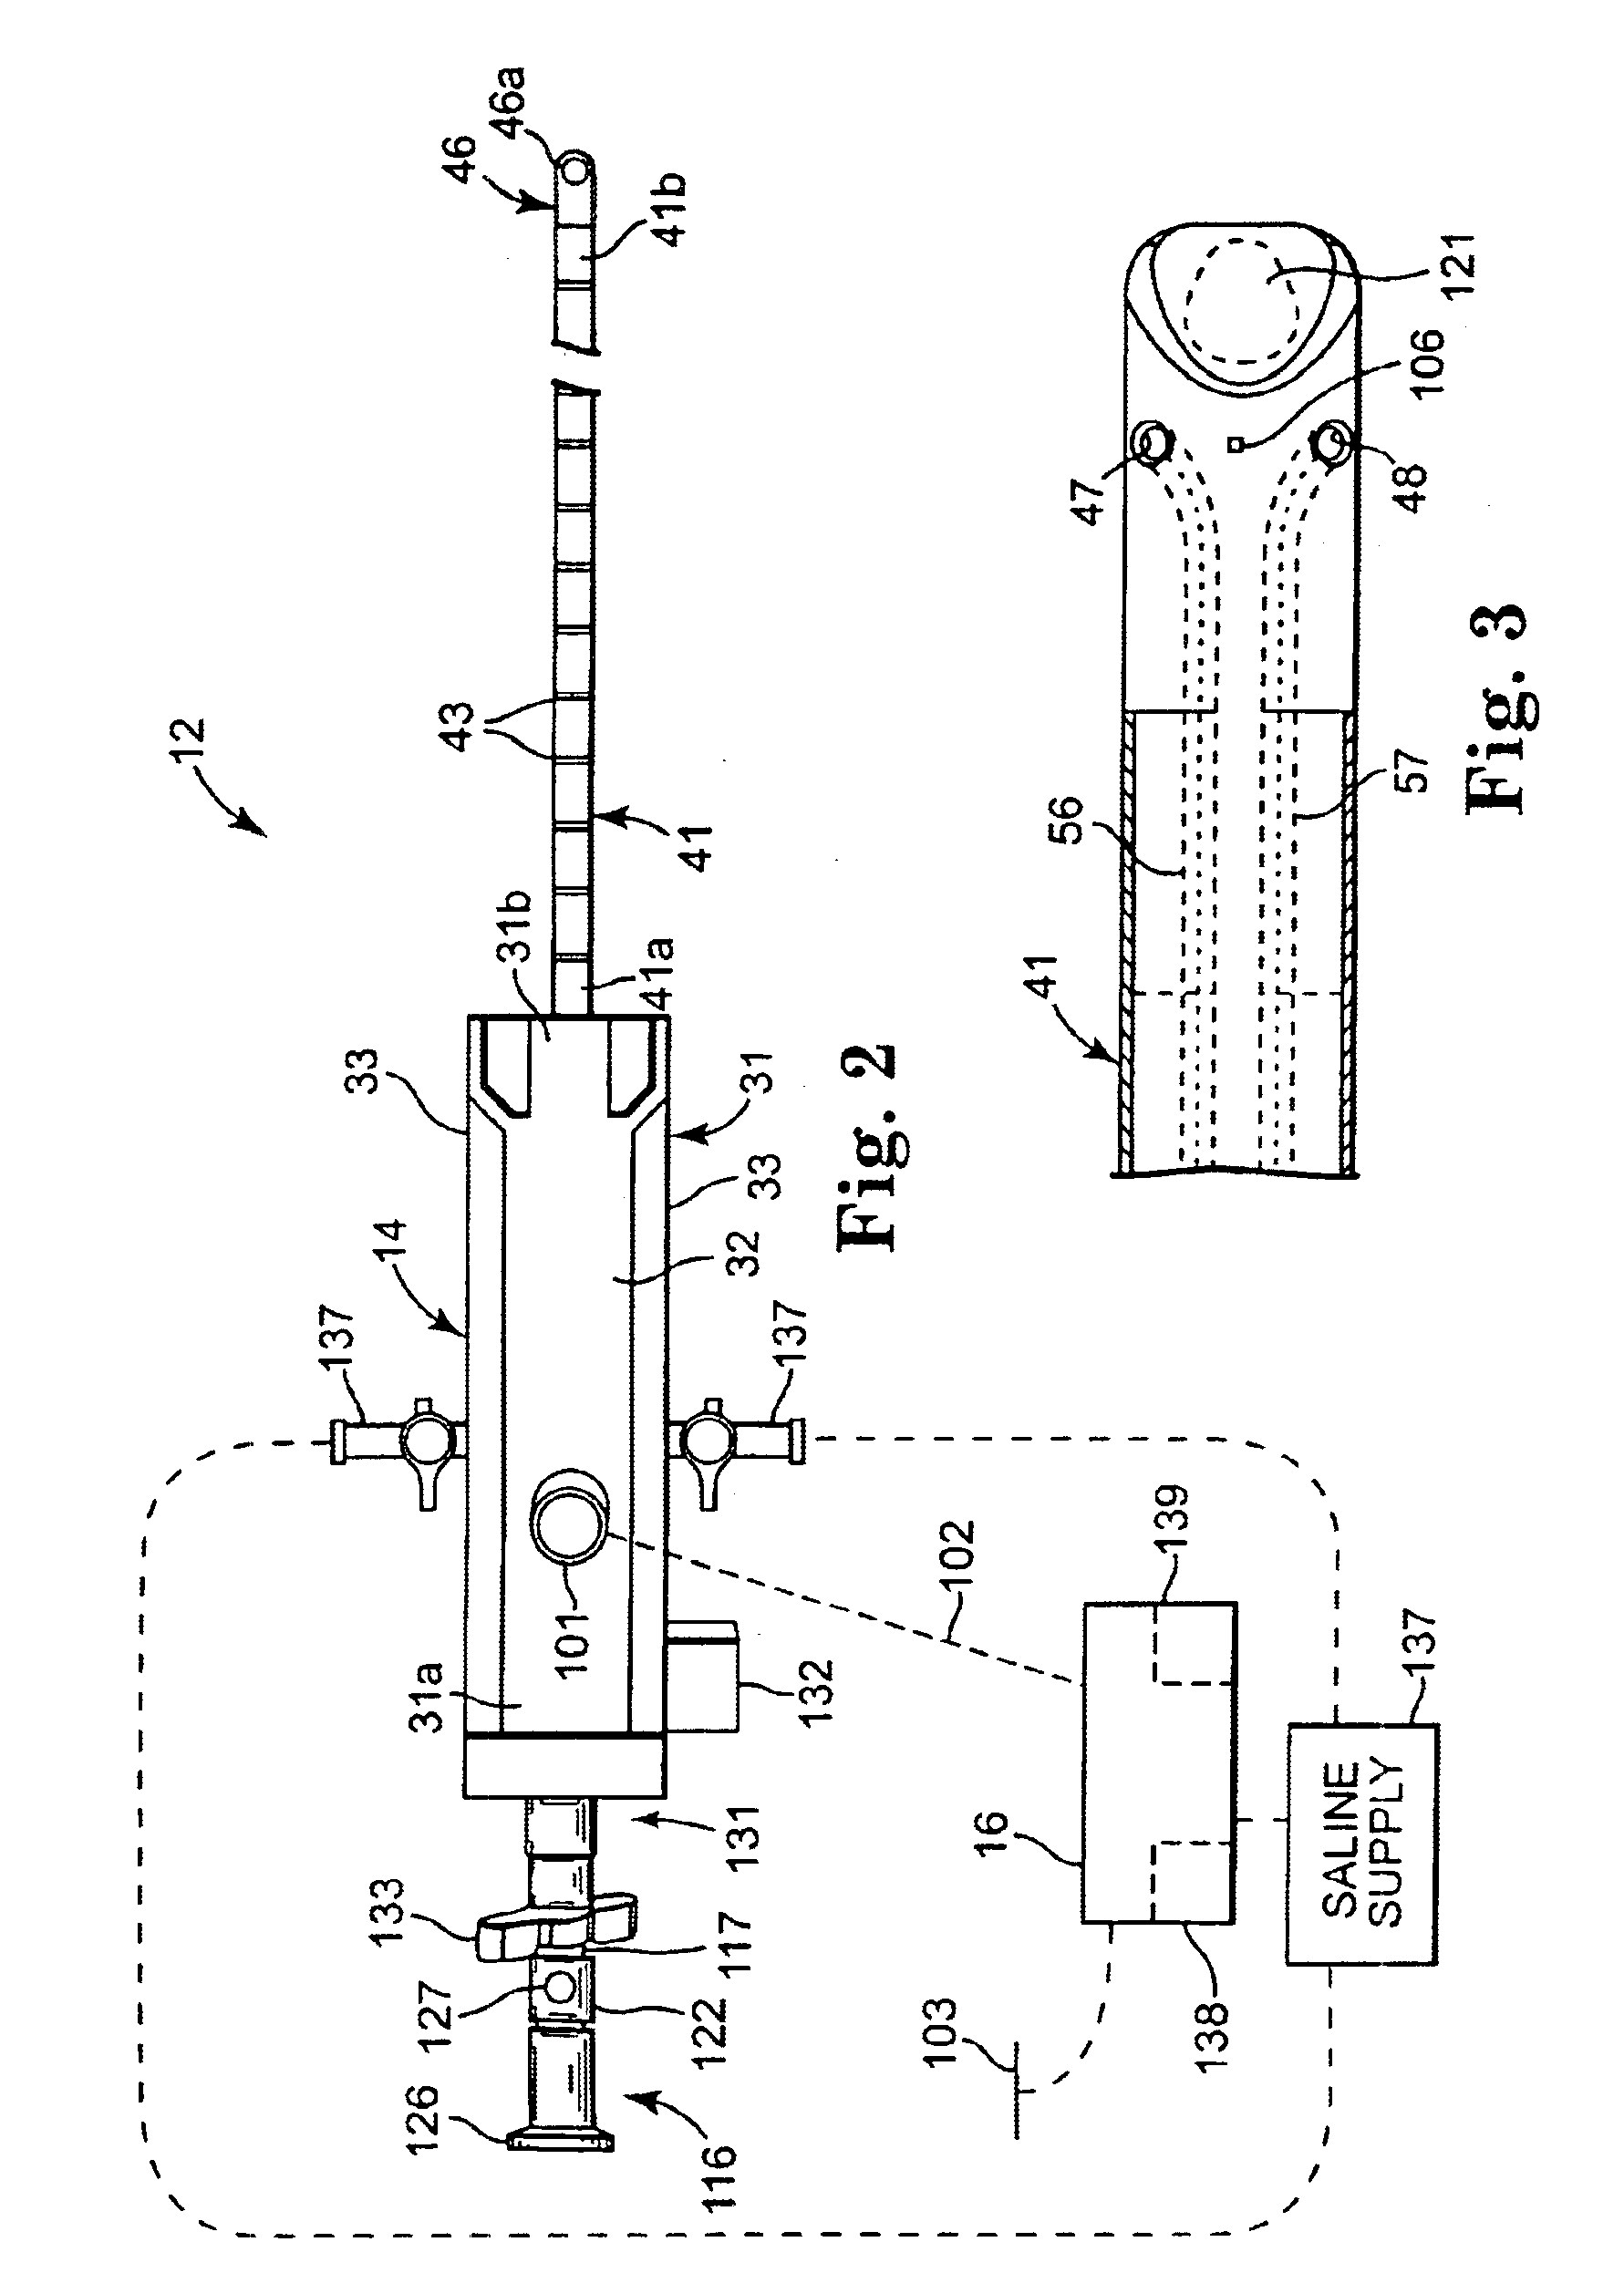 Method for treating tissue with a wet electrode and apparatus for using same